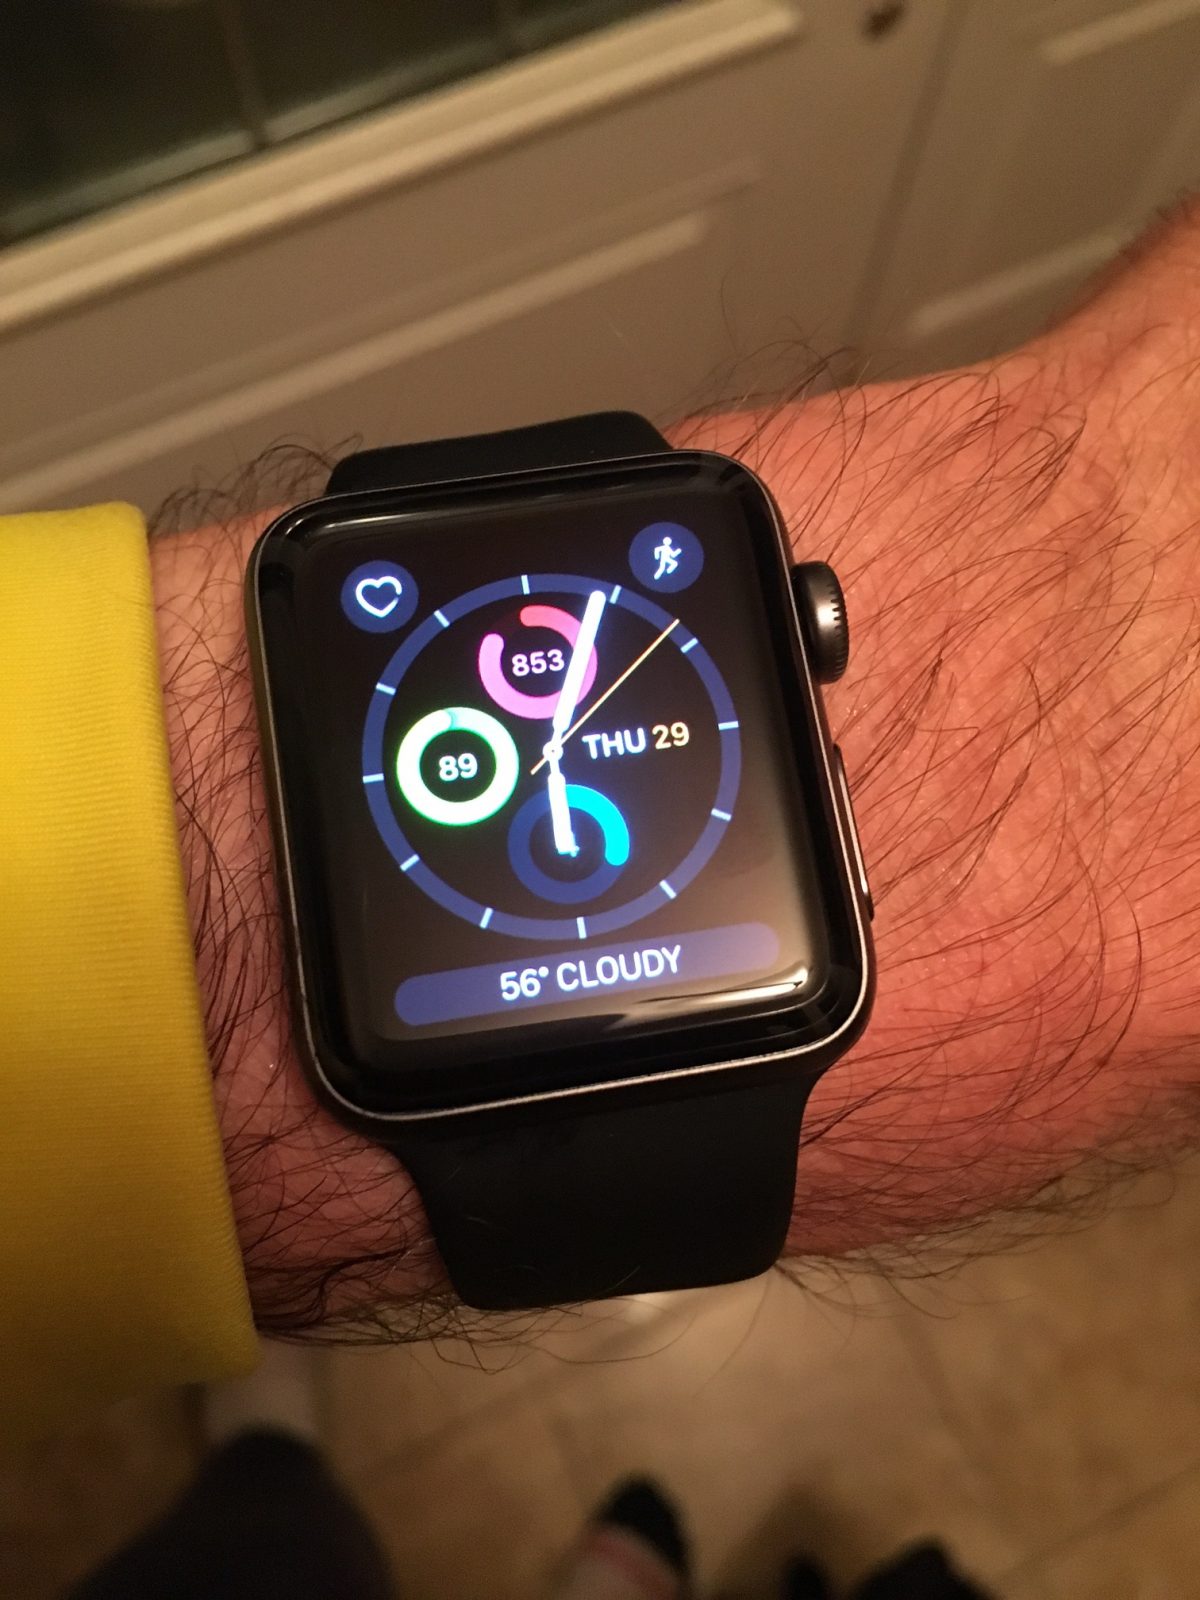 Runner's Review of the Apple Watch Series 2